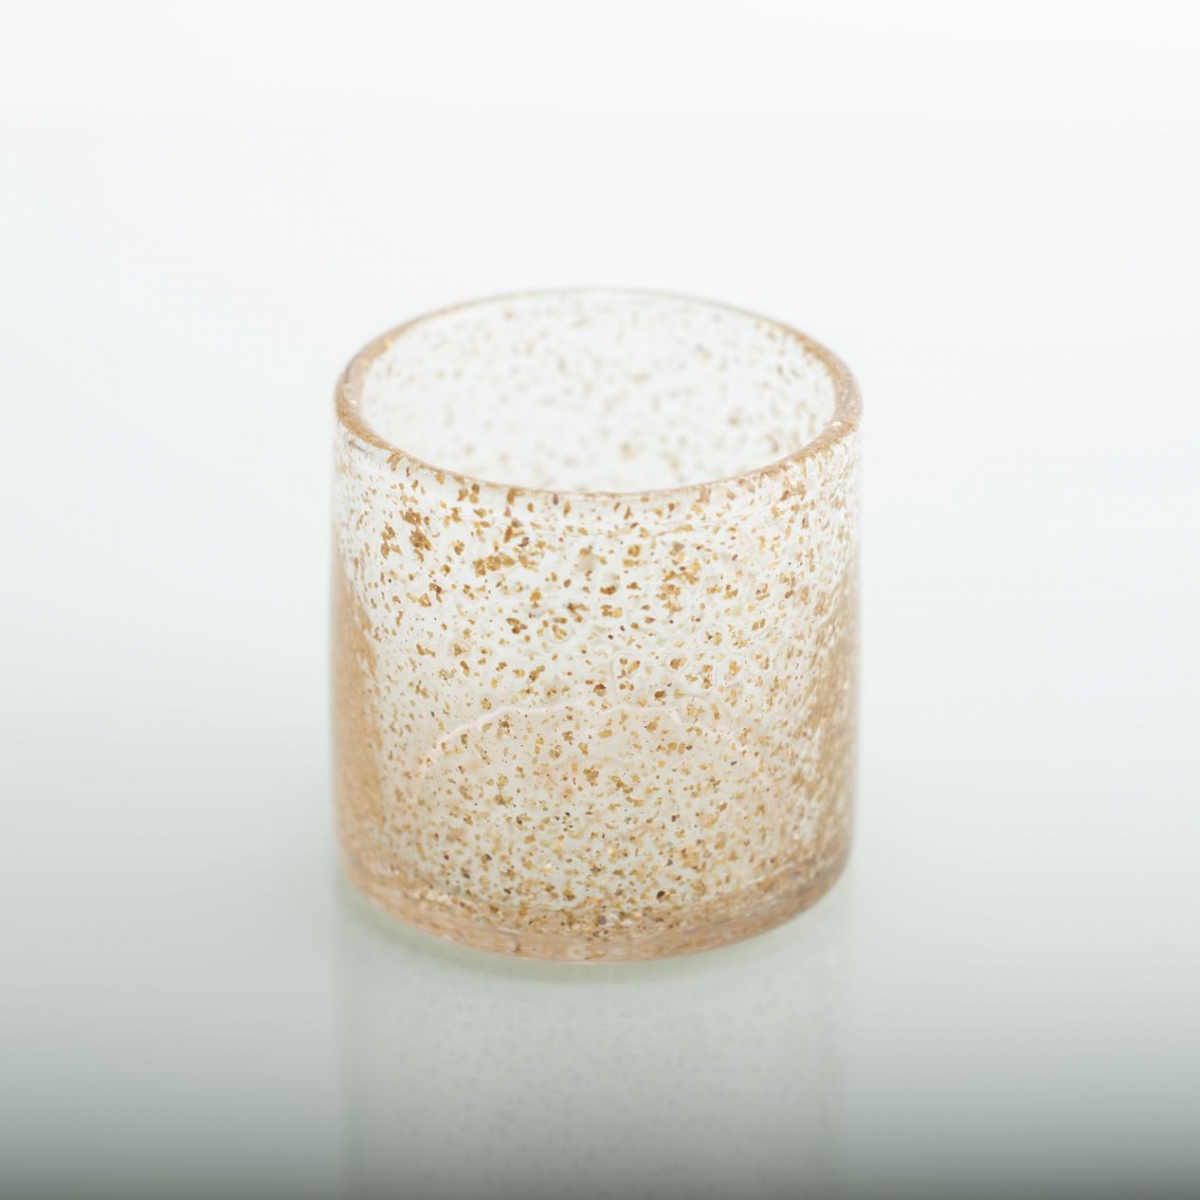 Creative Candle Jar- Gold Foil Glass Jar ,Glaze Glass Candle Holder ,Gypsophila Glass Candle Jar ,China Factory ,Price-HOWCANDLE-Candles,Scented Candles,Aromatherapy Candles,Soy Candles,Vegan Candles,Jar Candles,Pillar Candles,Candle Gift Sets,Essential Oils,Reed Diffuser,Candle Holder,